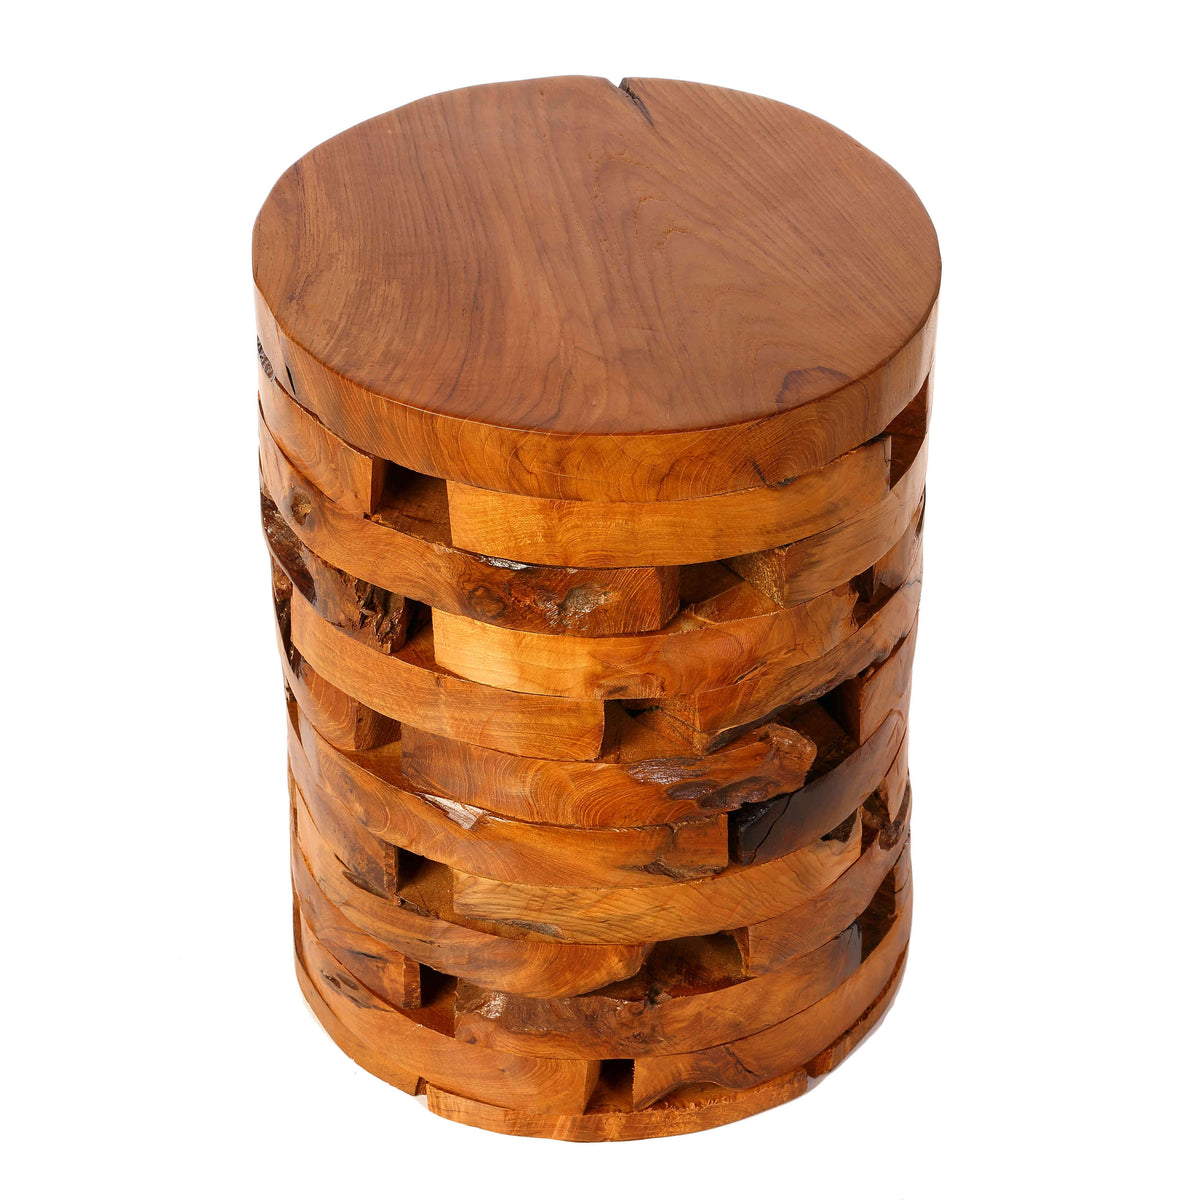 Bare Decor Stonehenge Artisan Accent Stool, Table in Solid Teak Wood